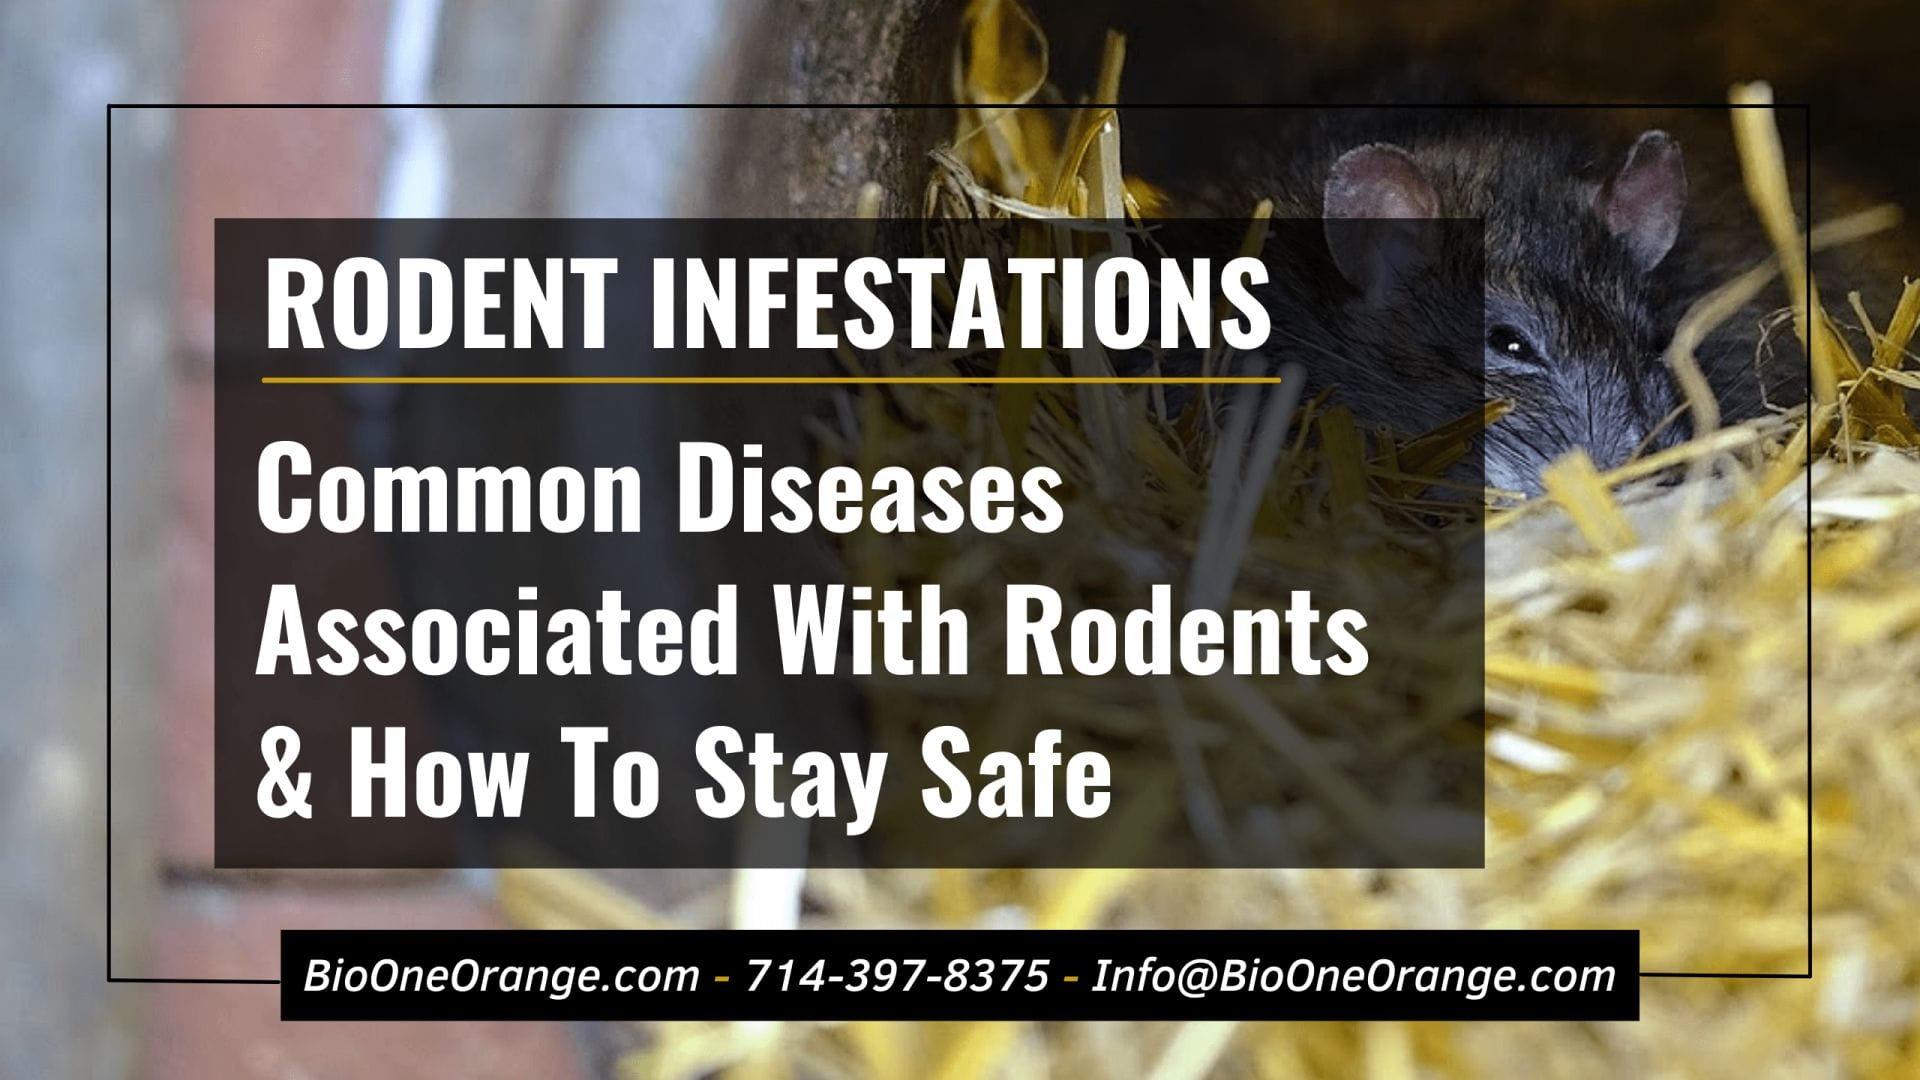 Common Diseases Associated With Rodent Infestations & How To Stay Safe